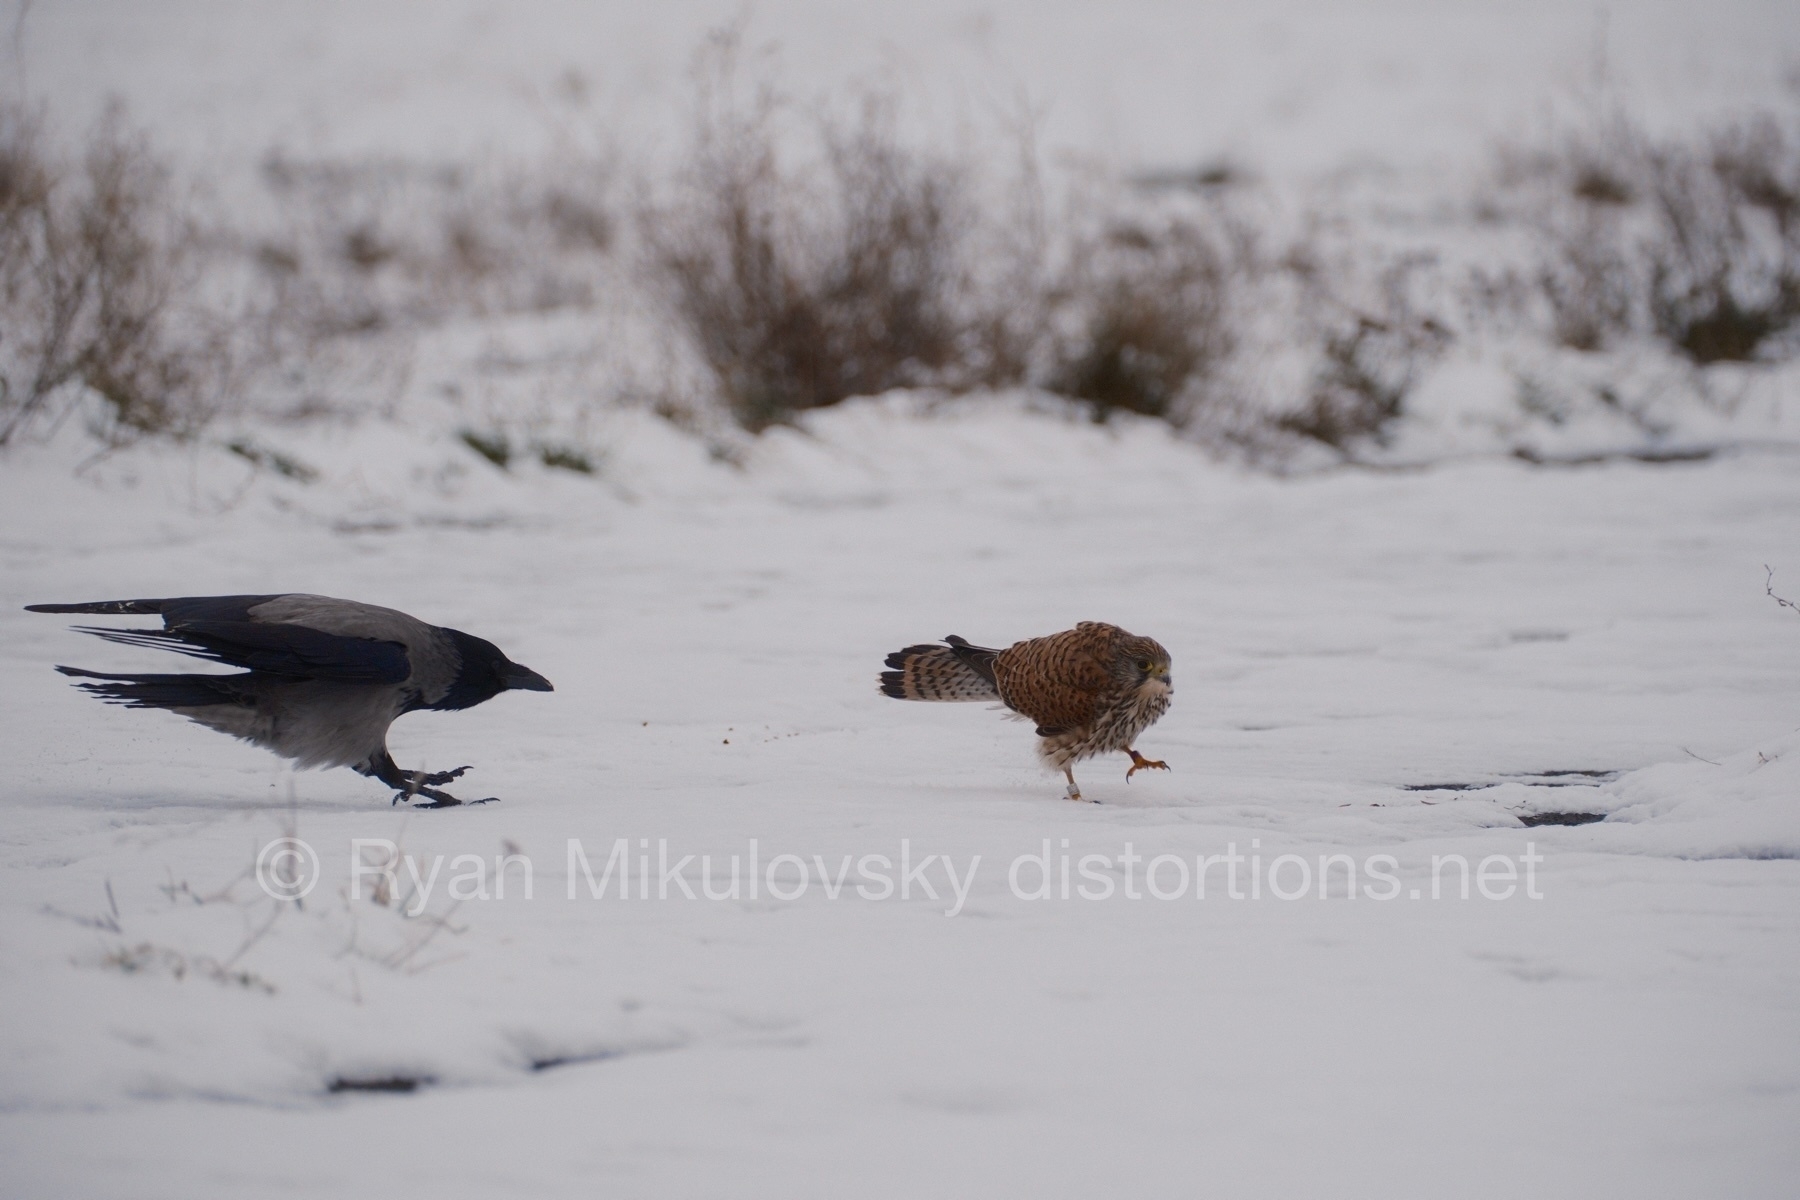 In shallow snow, a hooded crow chases after a small brown kestrel. Dead brown weedy plants frame the background. The image is watermarked, Copyright Ryan Mikulovsky